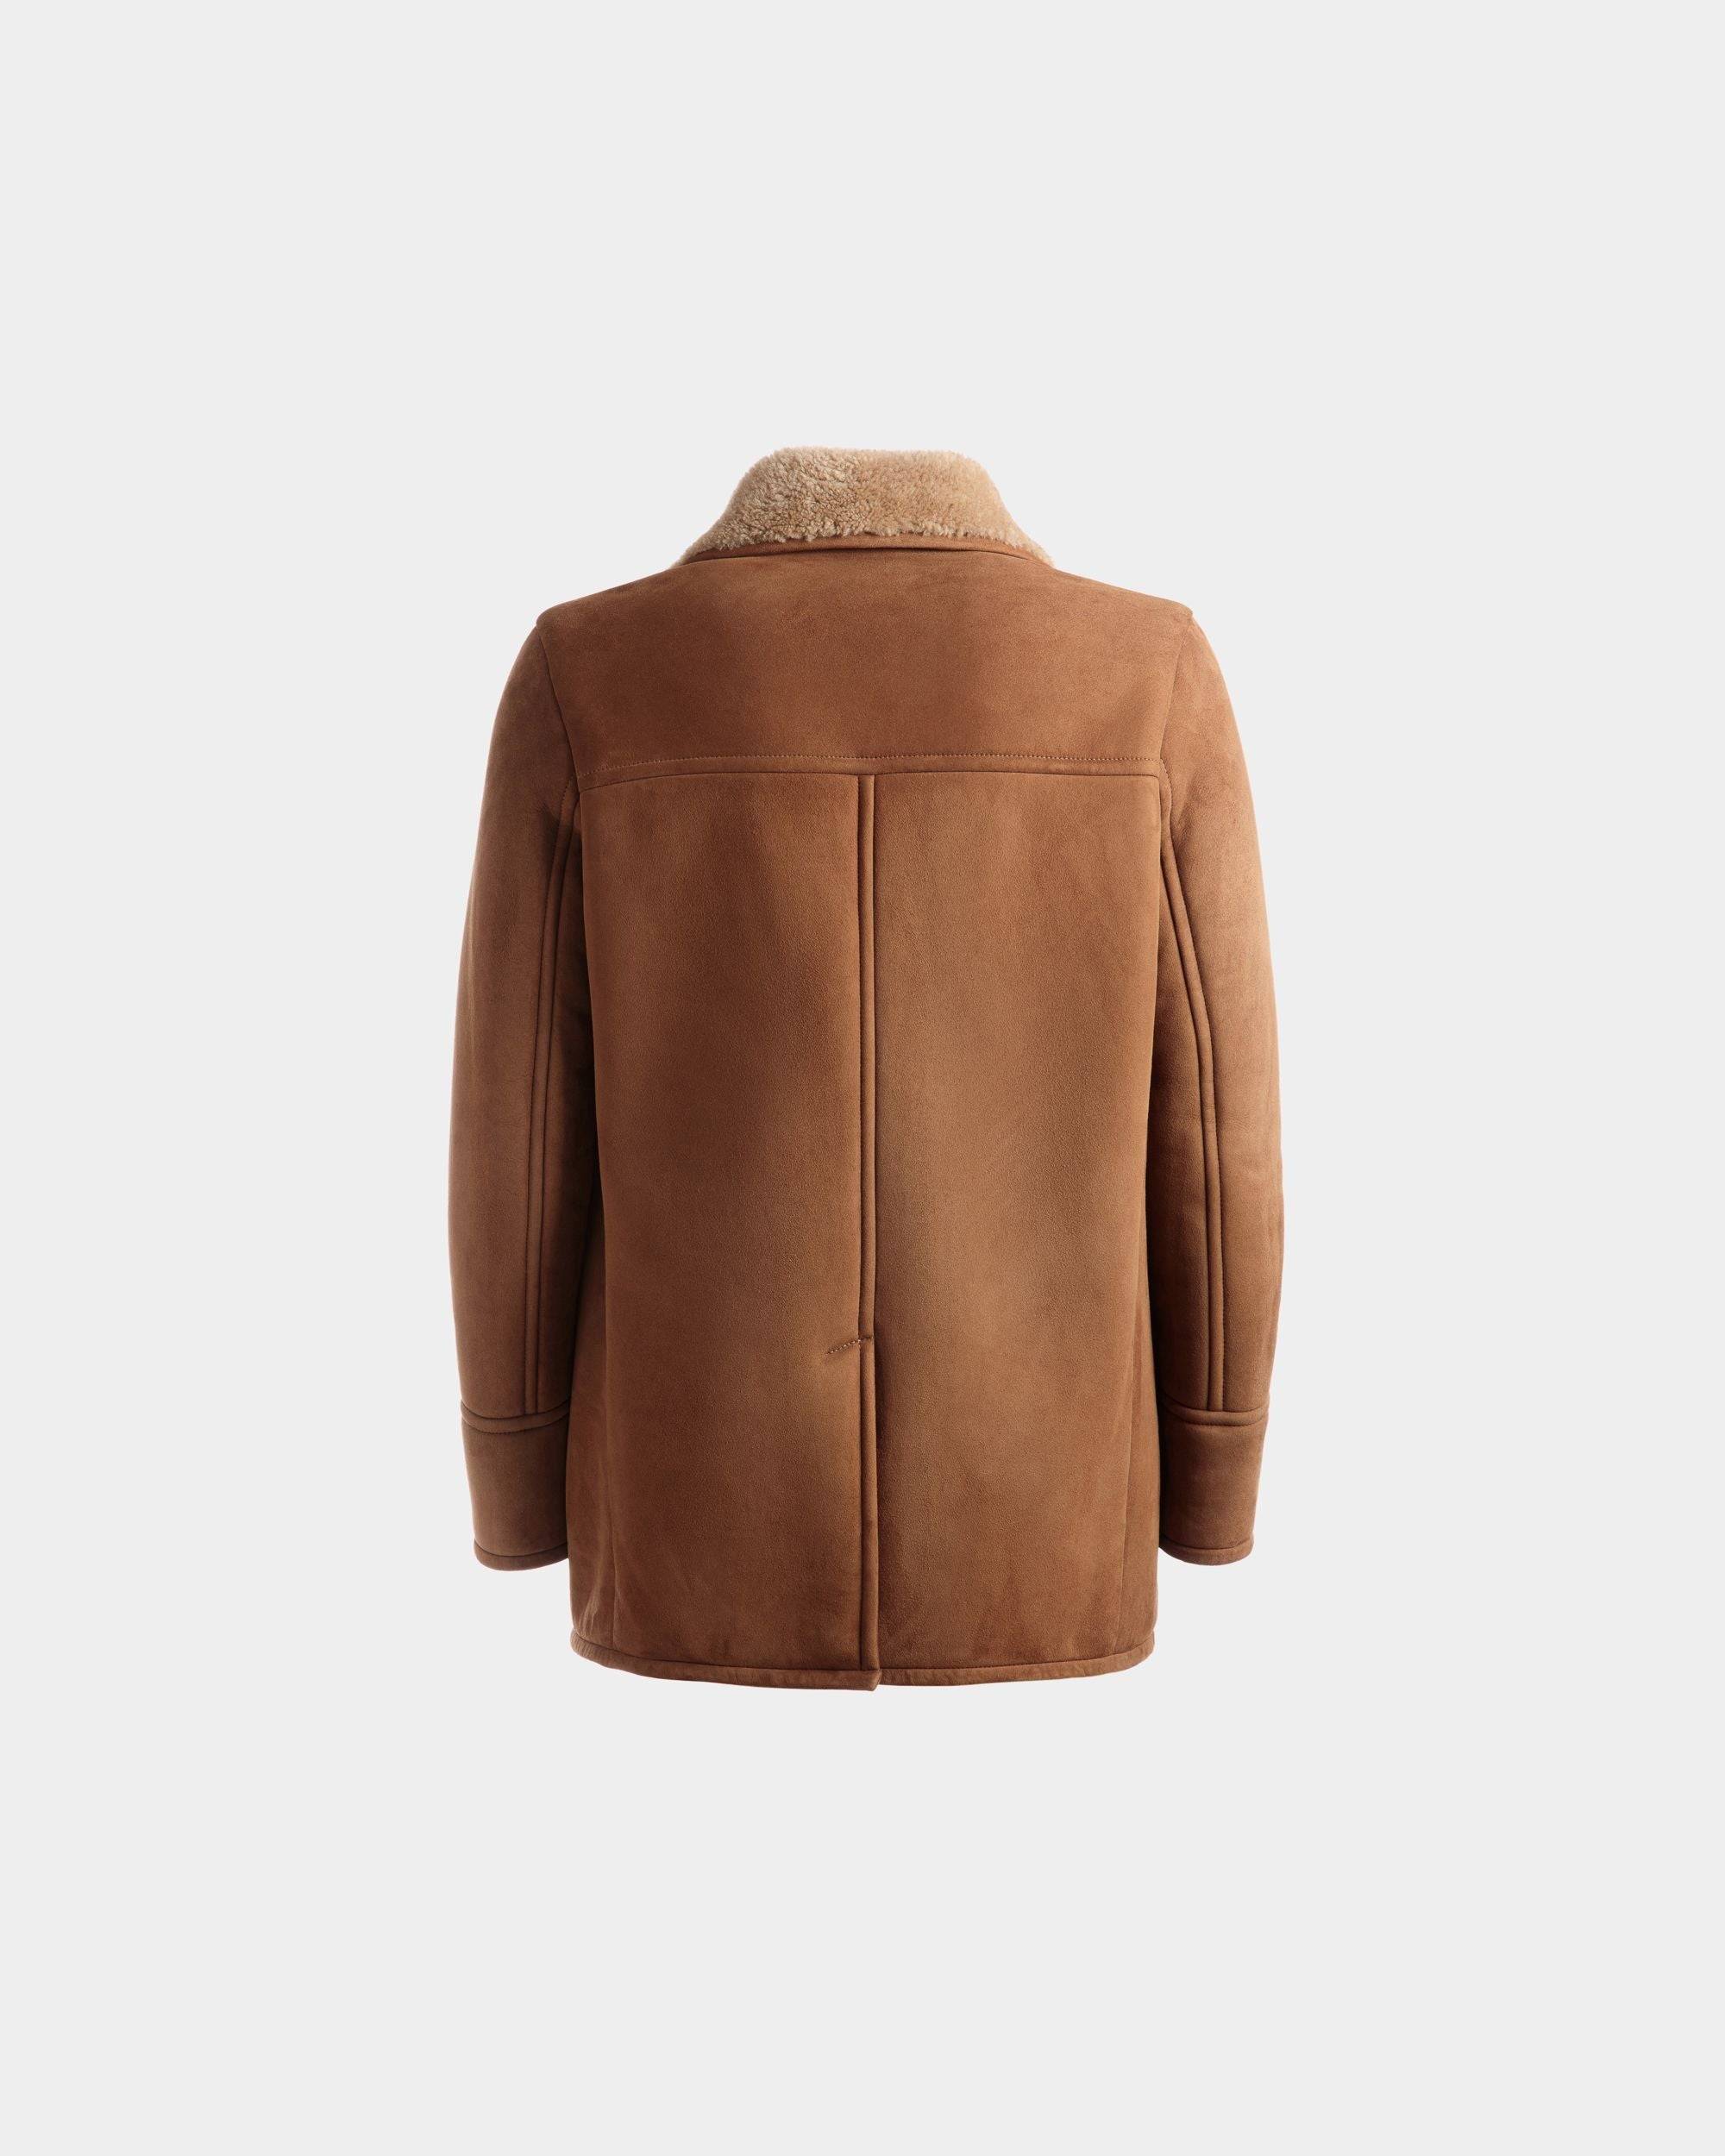 Double Breasted Shearling Coat | Men's Outerwear | Brown Suede | Bally | Still Life Back